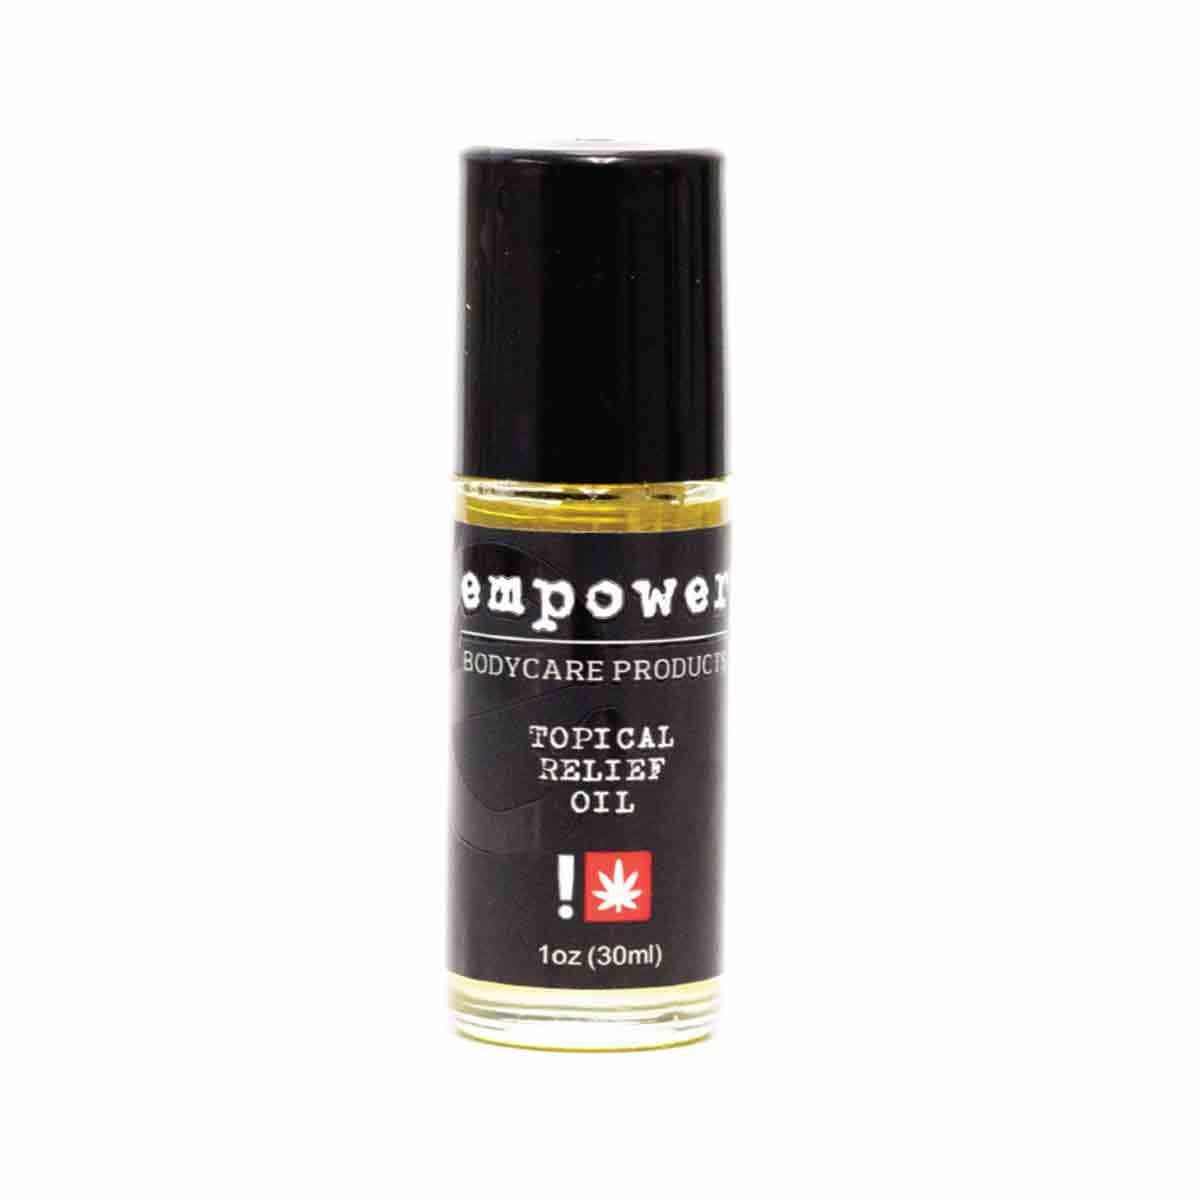 Empower® Topical Relief Oil - Black Label 30ml